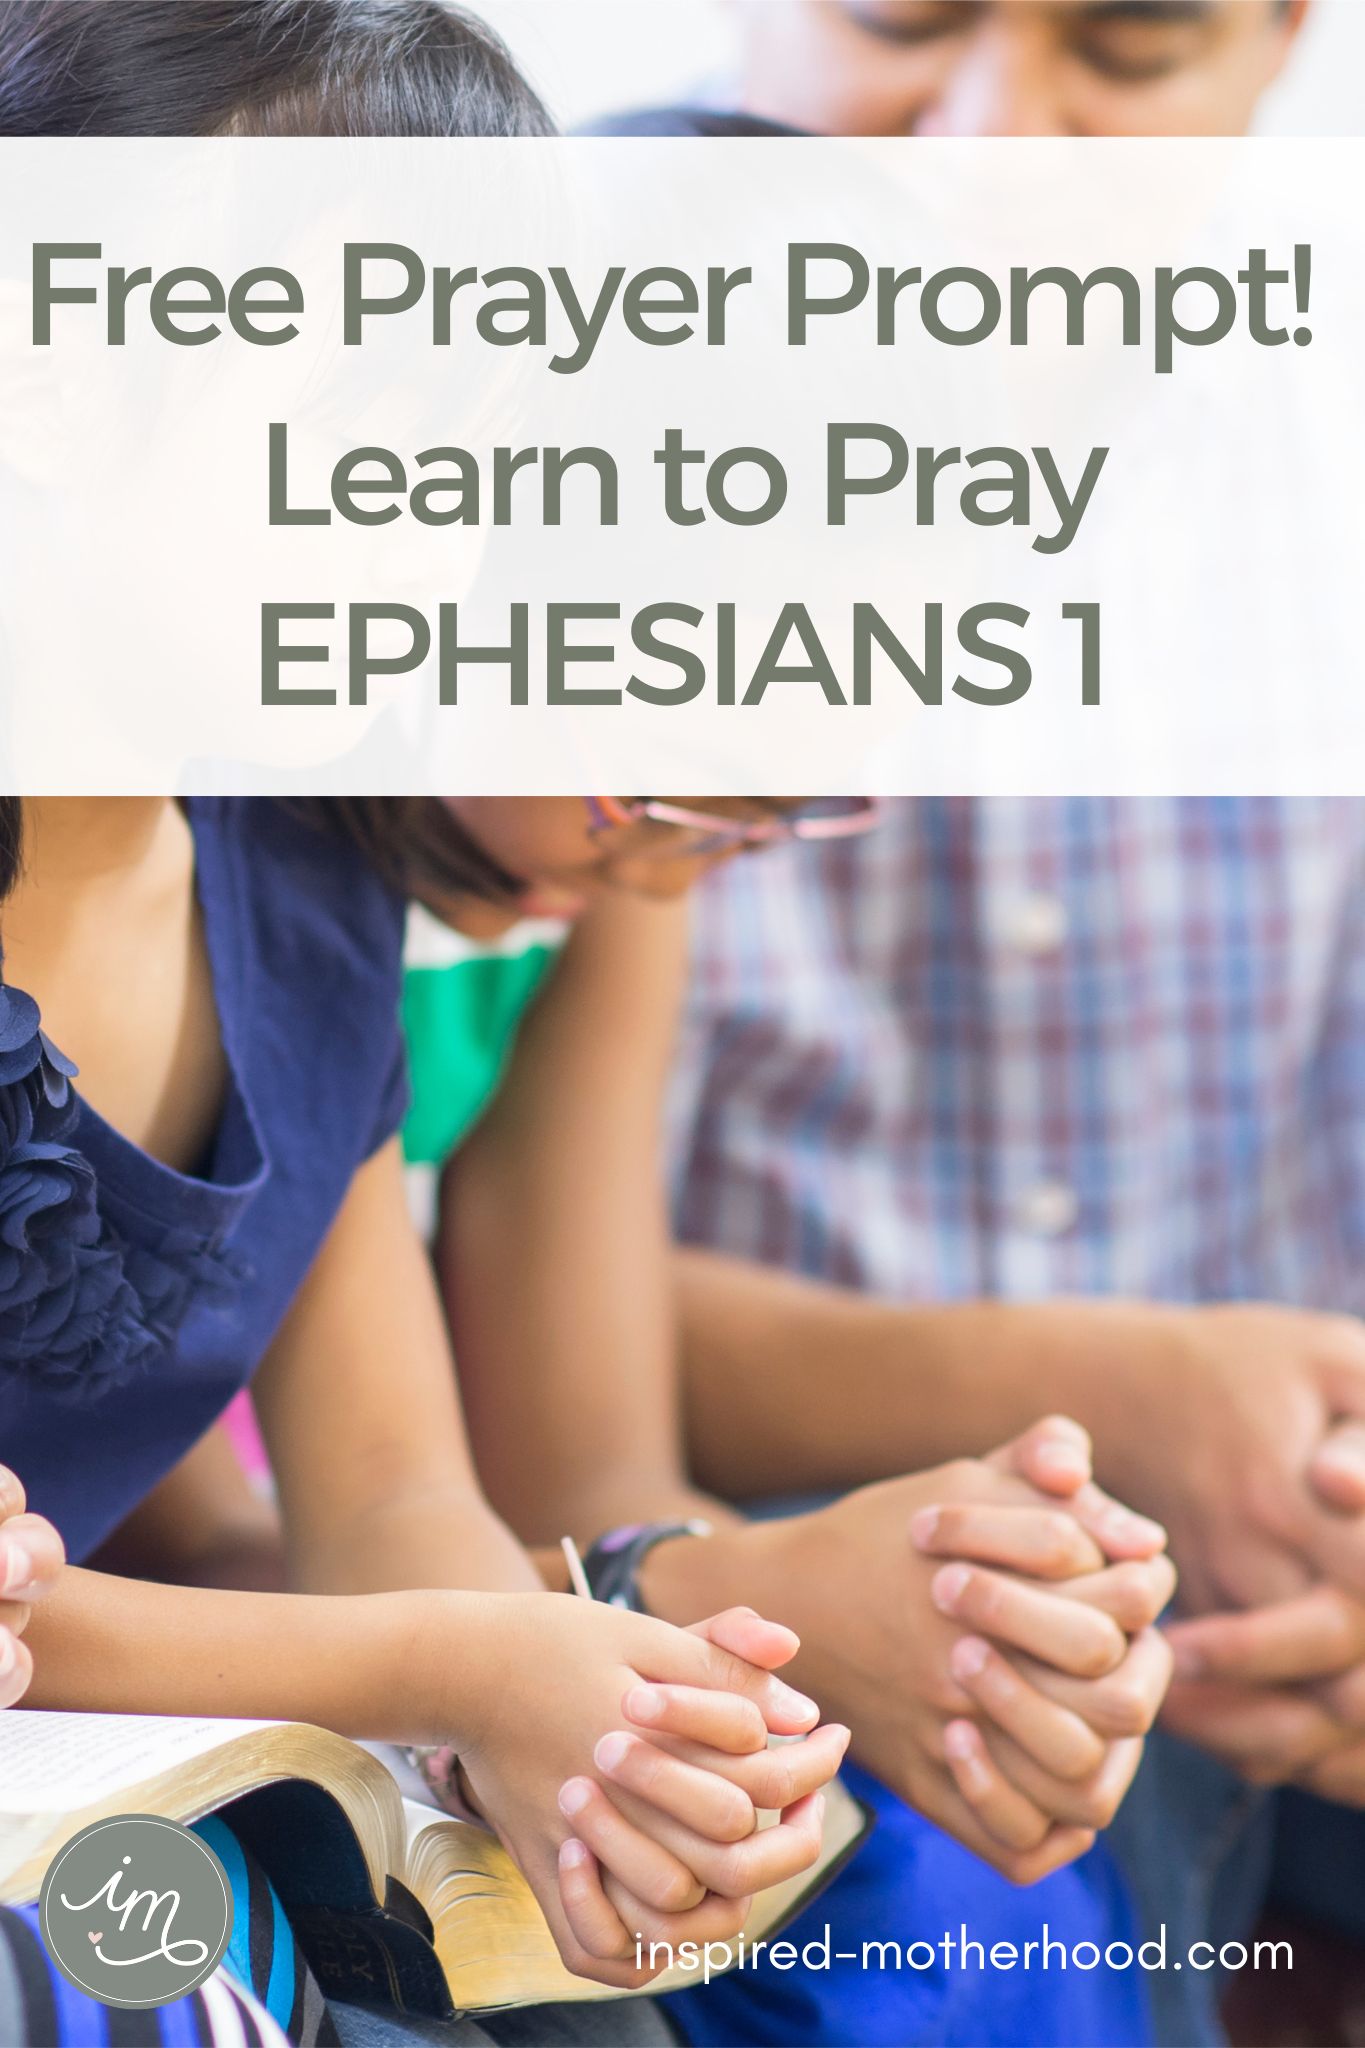 Download and print these free prayer prompt to pray powerful scriptures over your kids and family. The prayer is from Ephesians 1.